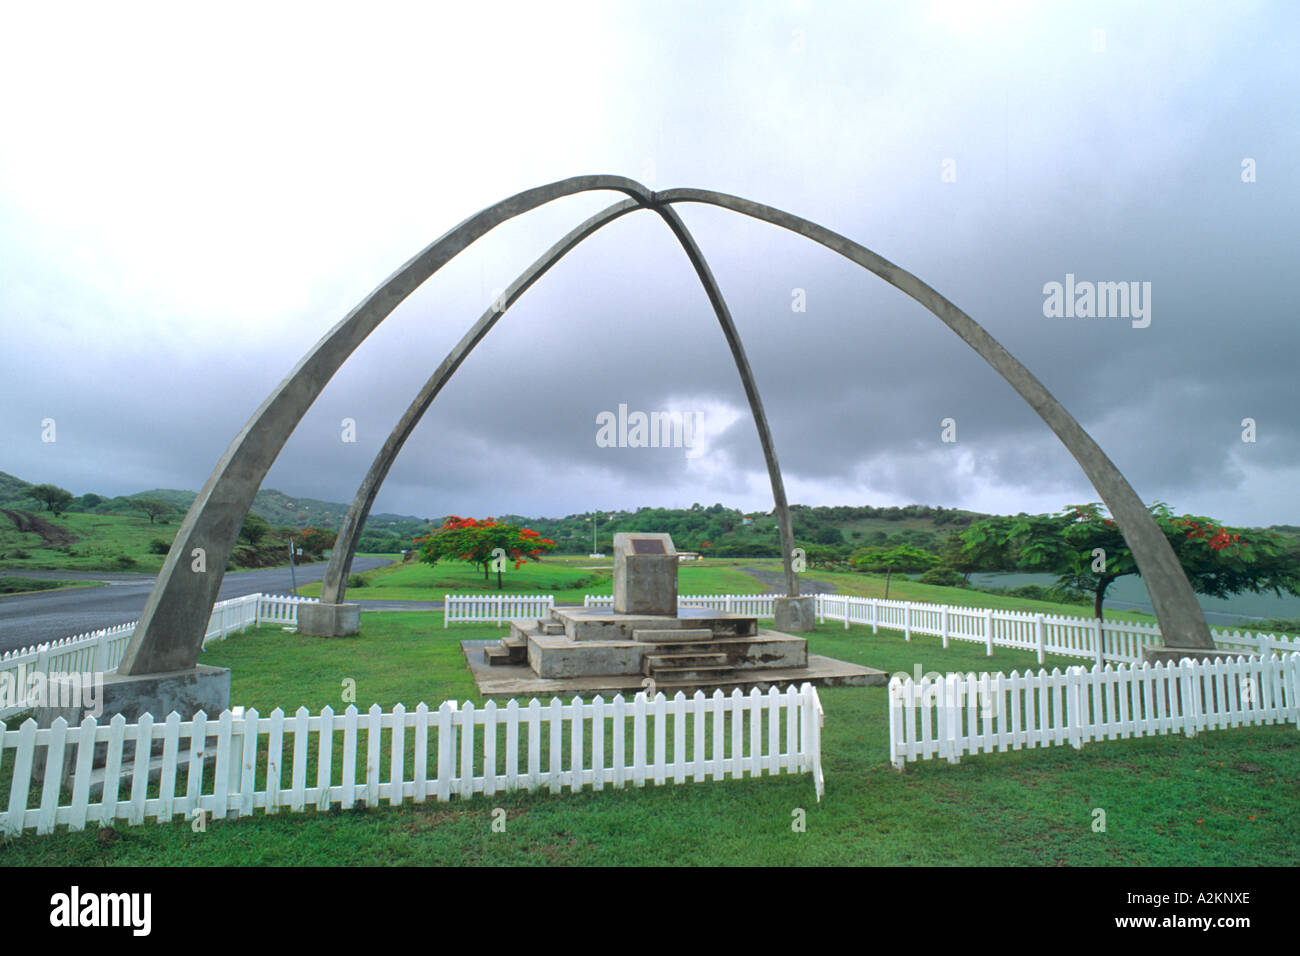 Monument for 1980s war that USA rescued Grenada from invasion in Caribbean Stock Photo